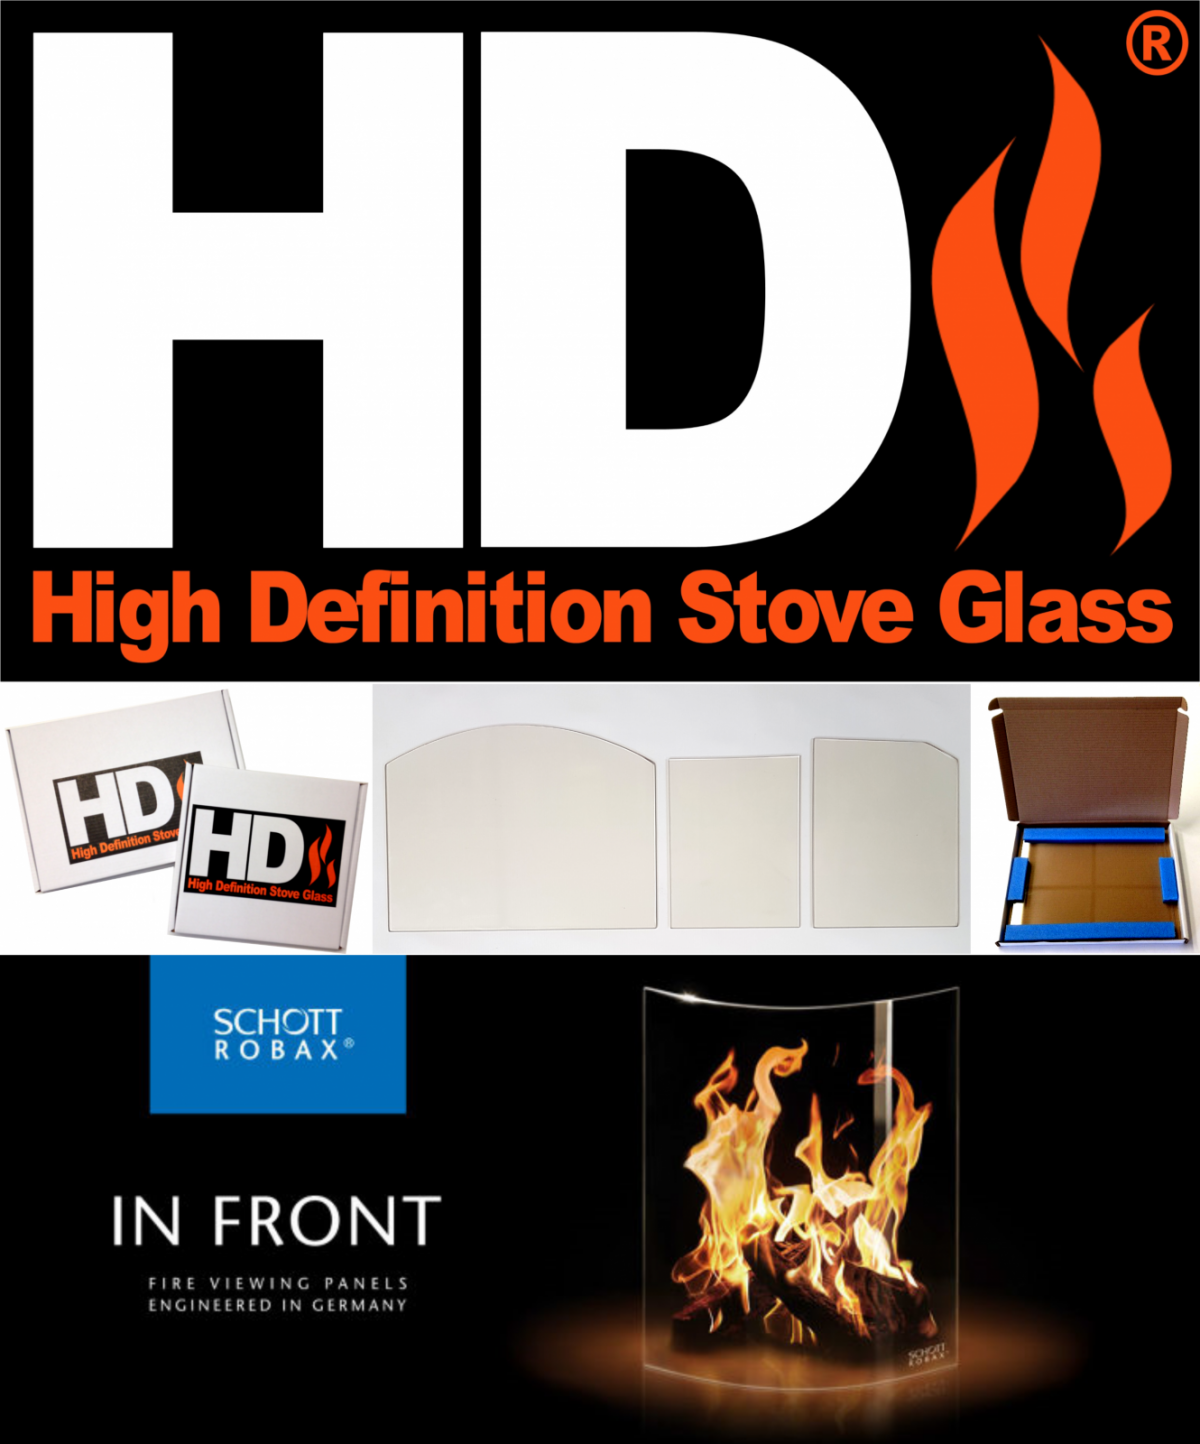 High Definition Stove Glass for the Stovax Stockton 7